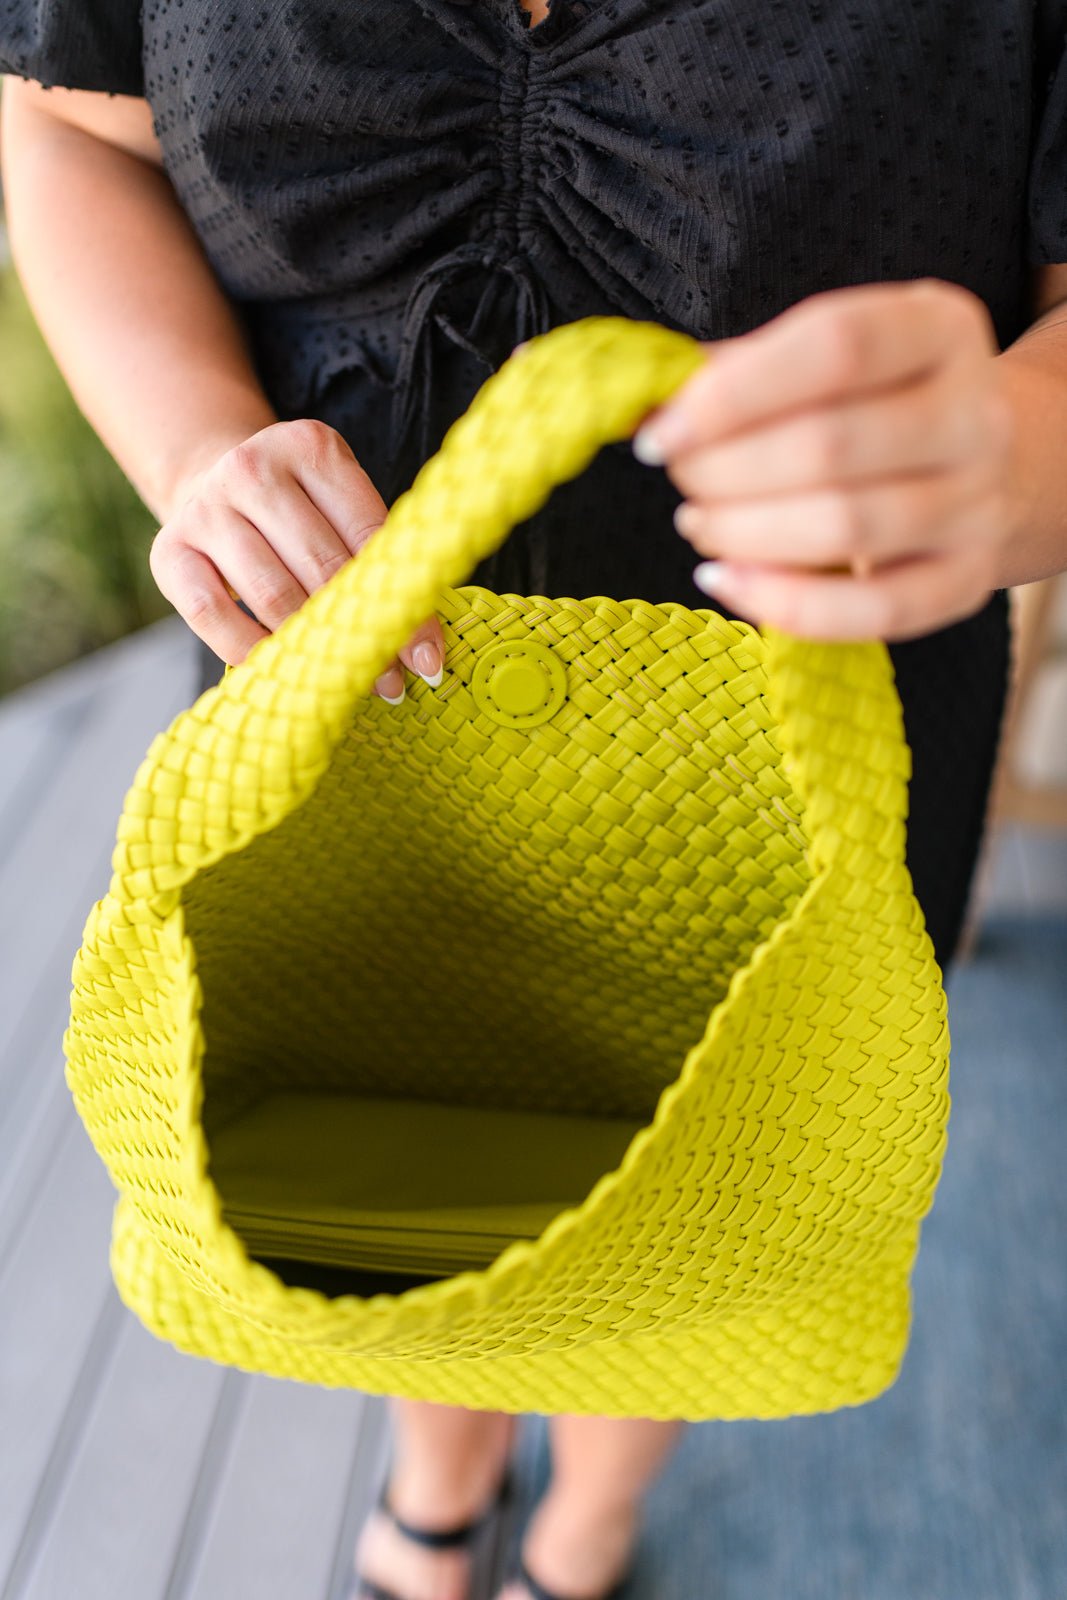 Woven and Worn Tote in Citron - Happily Ever Atchison Shop Co.